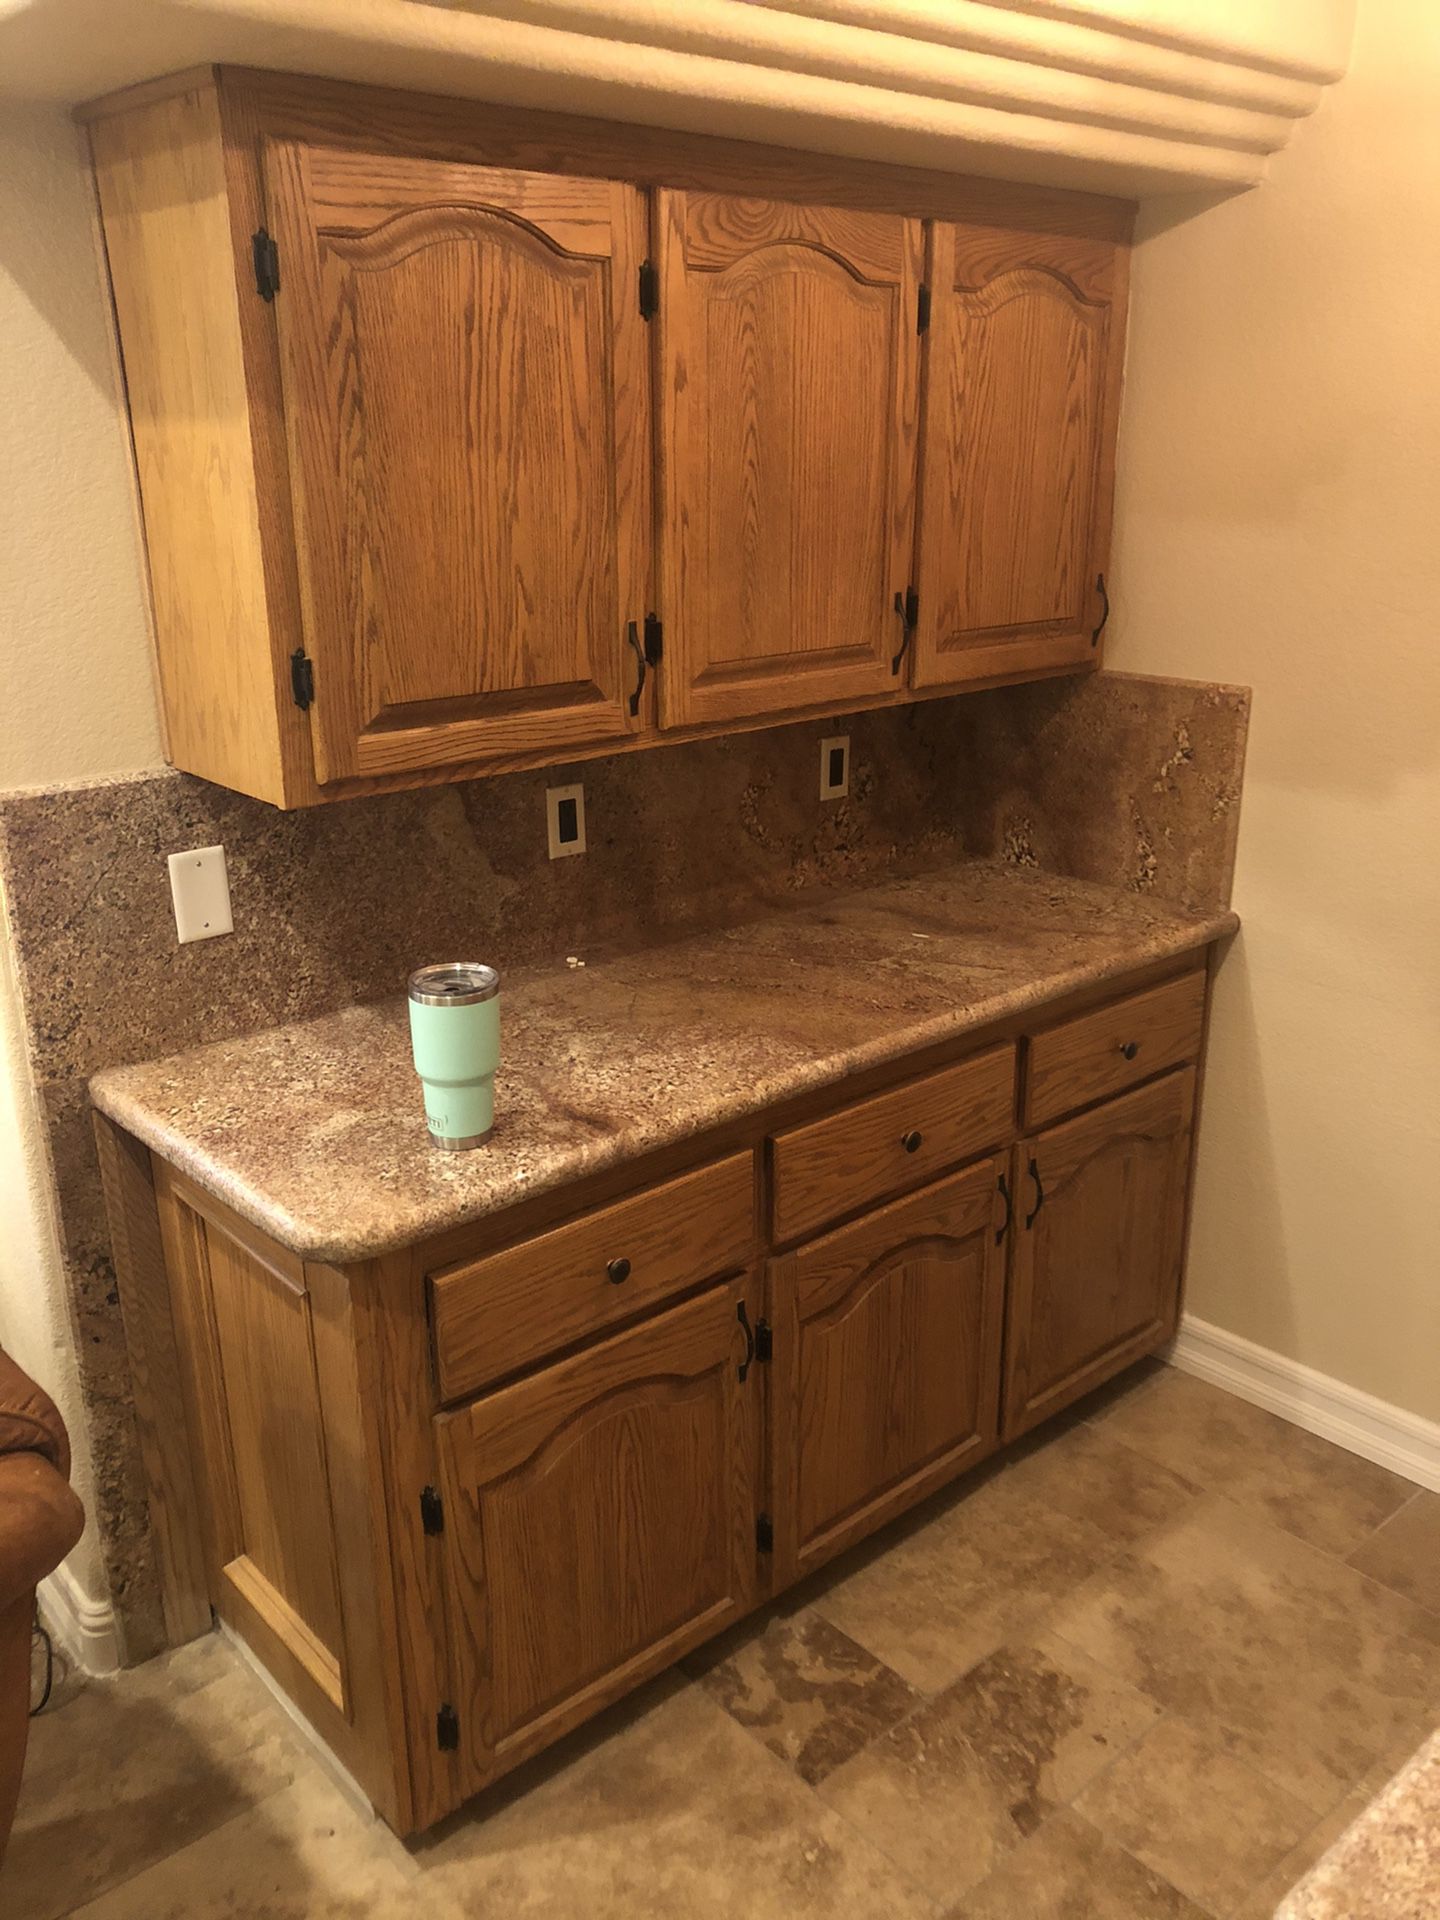 Upper and lower cabinets, garage or kitchen